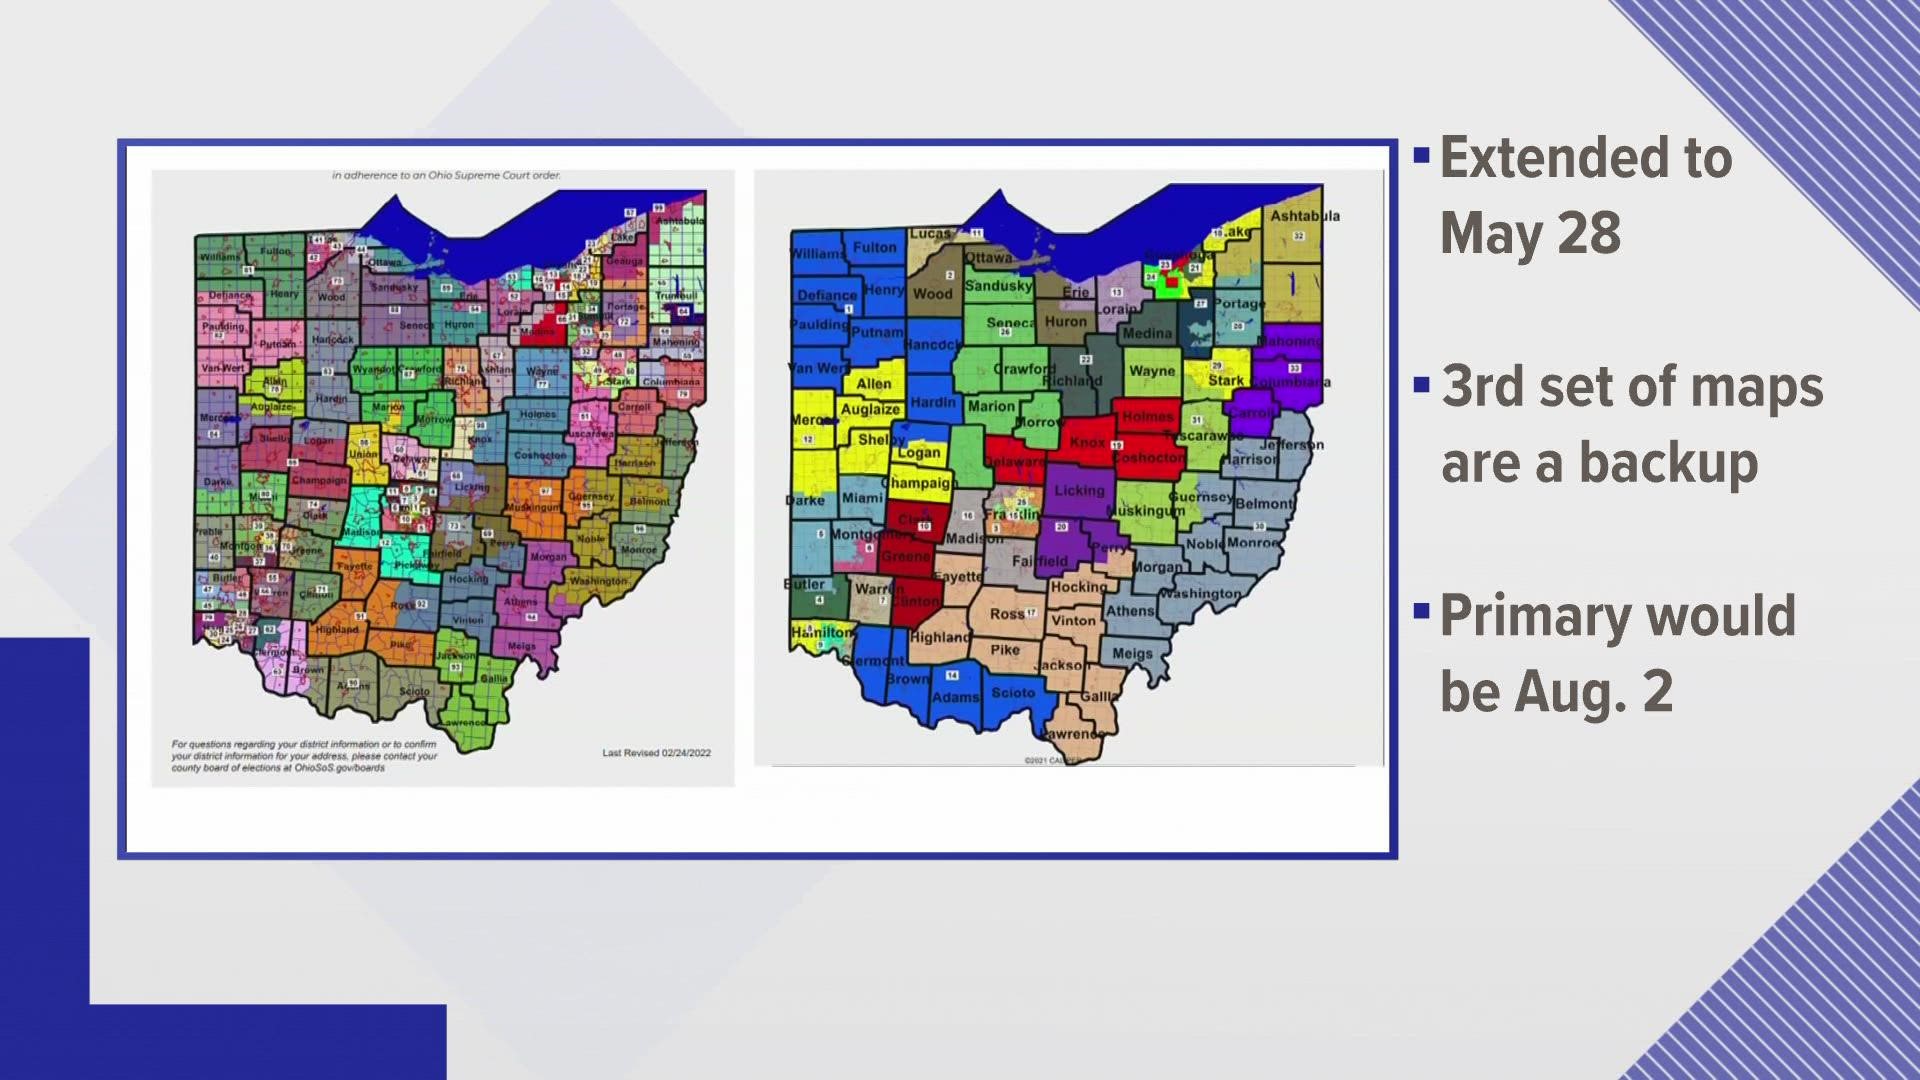 The third set of maps was developed in February, but rejected by the Ohio Supreme Court weeks later as unconstitutional.